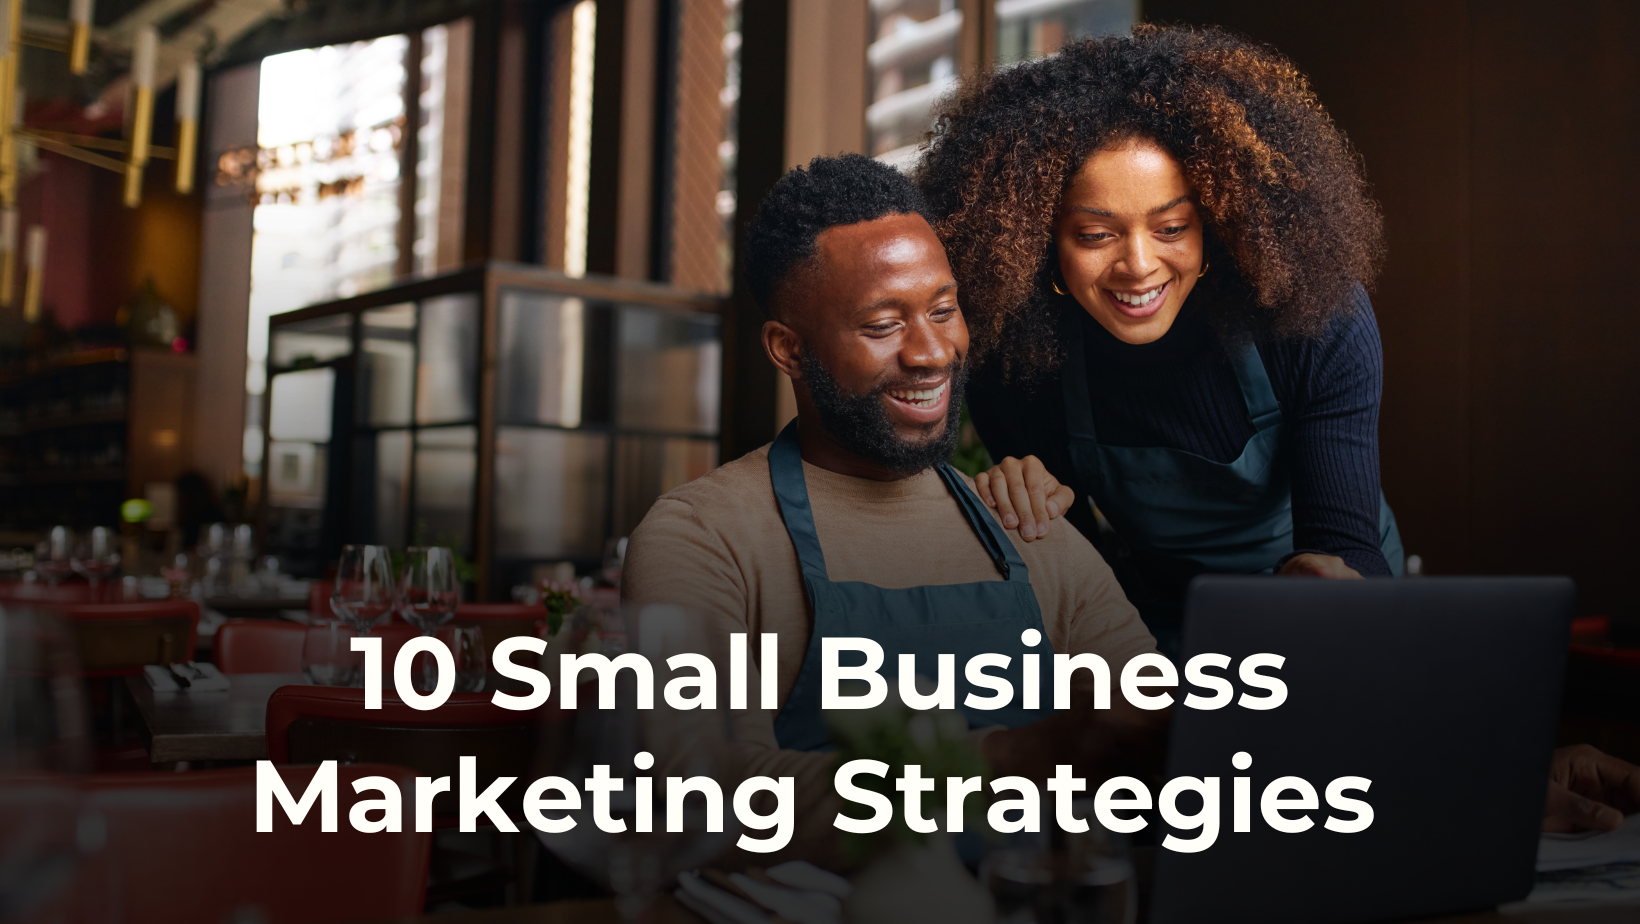 10 Genius Small Business Marketing Strategies That Actually Work